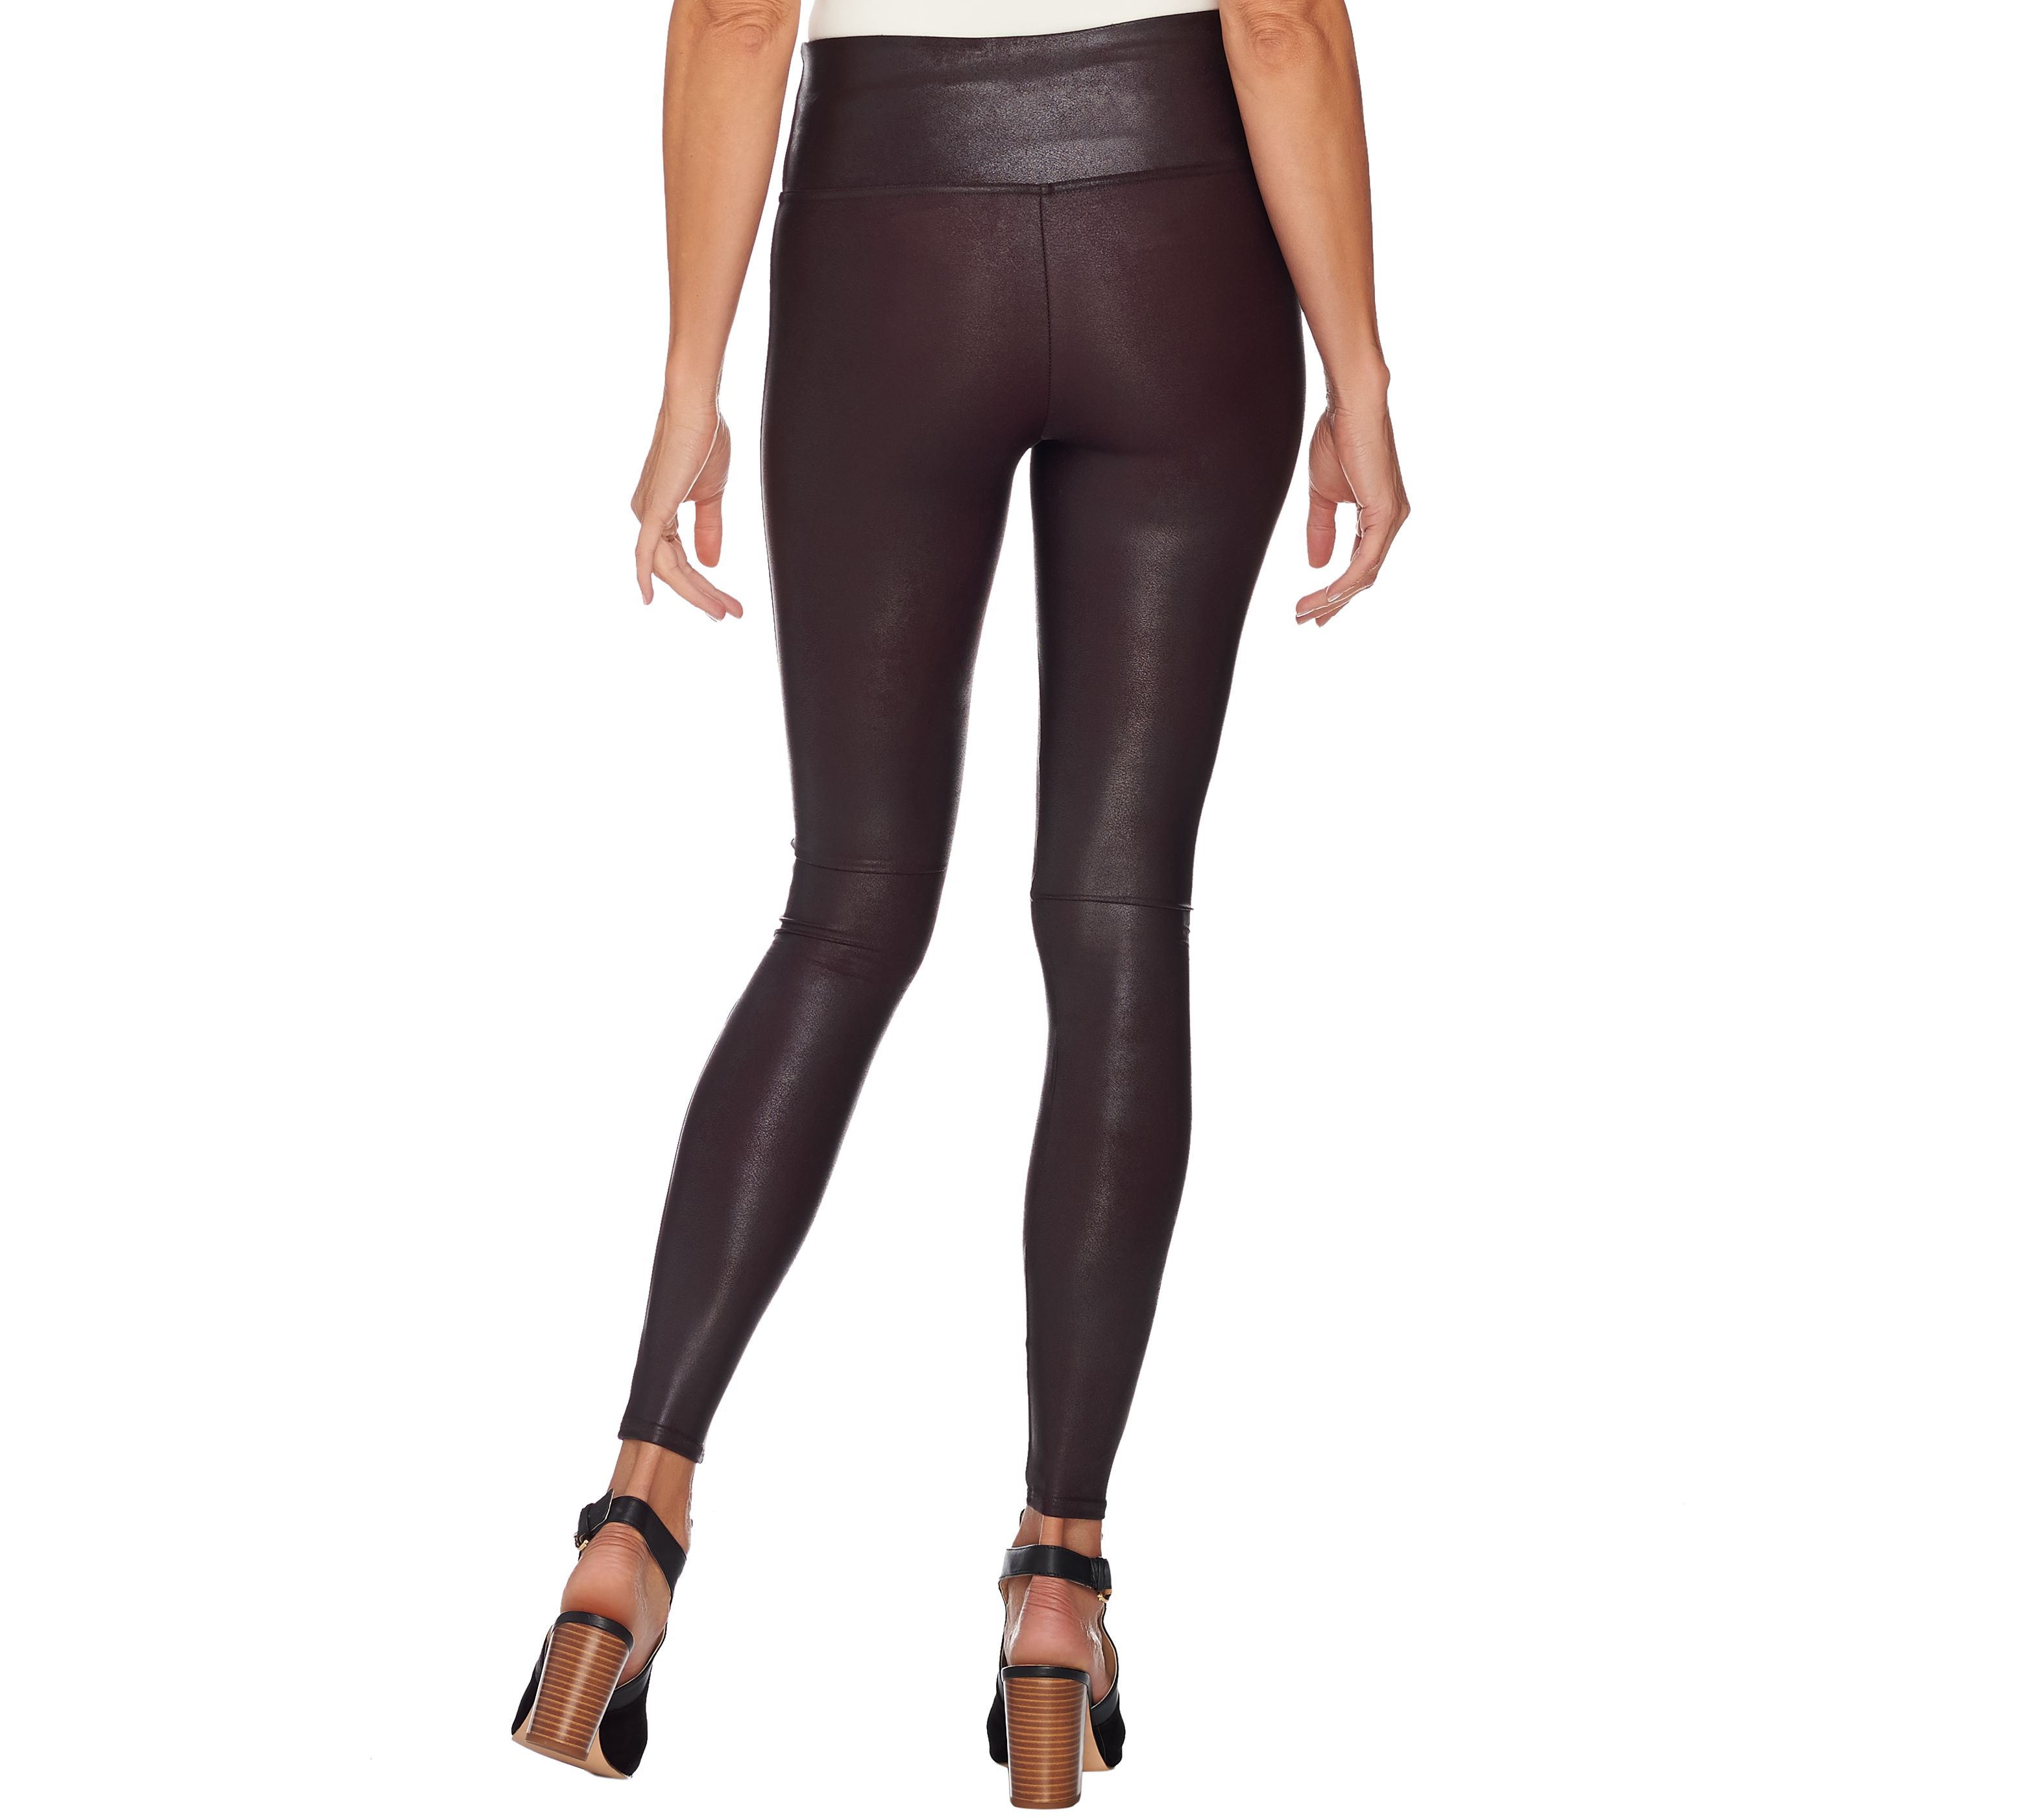 Spanx's Faux Leather Leggings Just Got a Warm and Cozy Upgrade That We  Can't Wait to Wear